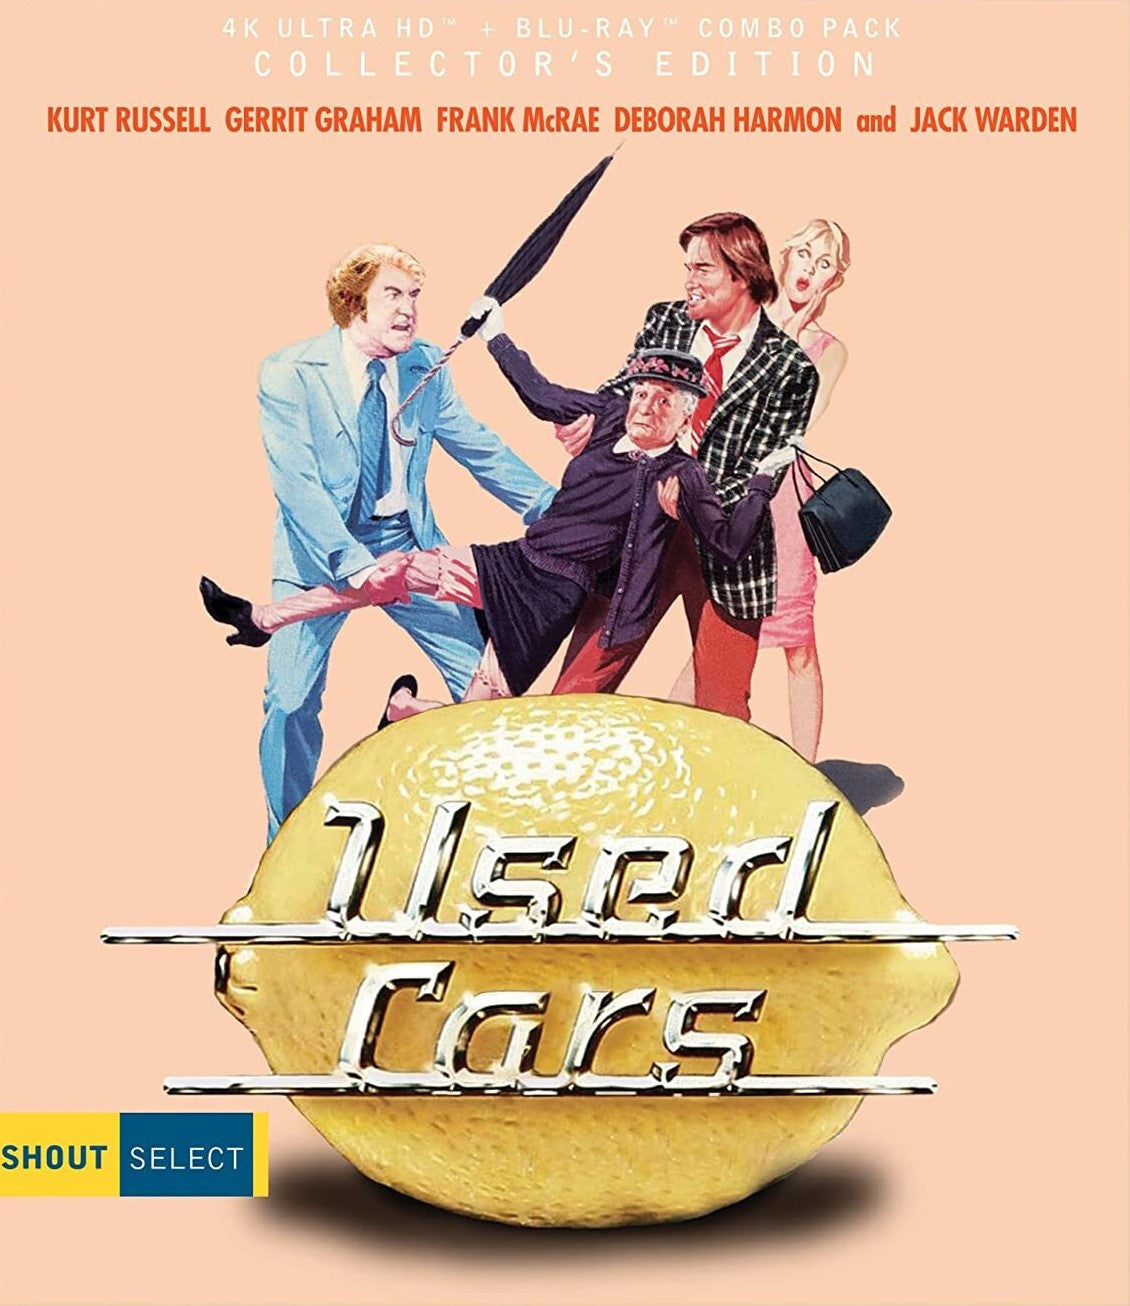 USED CARS (COLLECTOR'S EDITION) 4K UHD/BLU-RAY